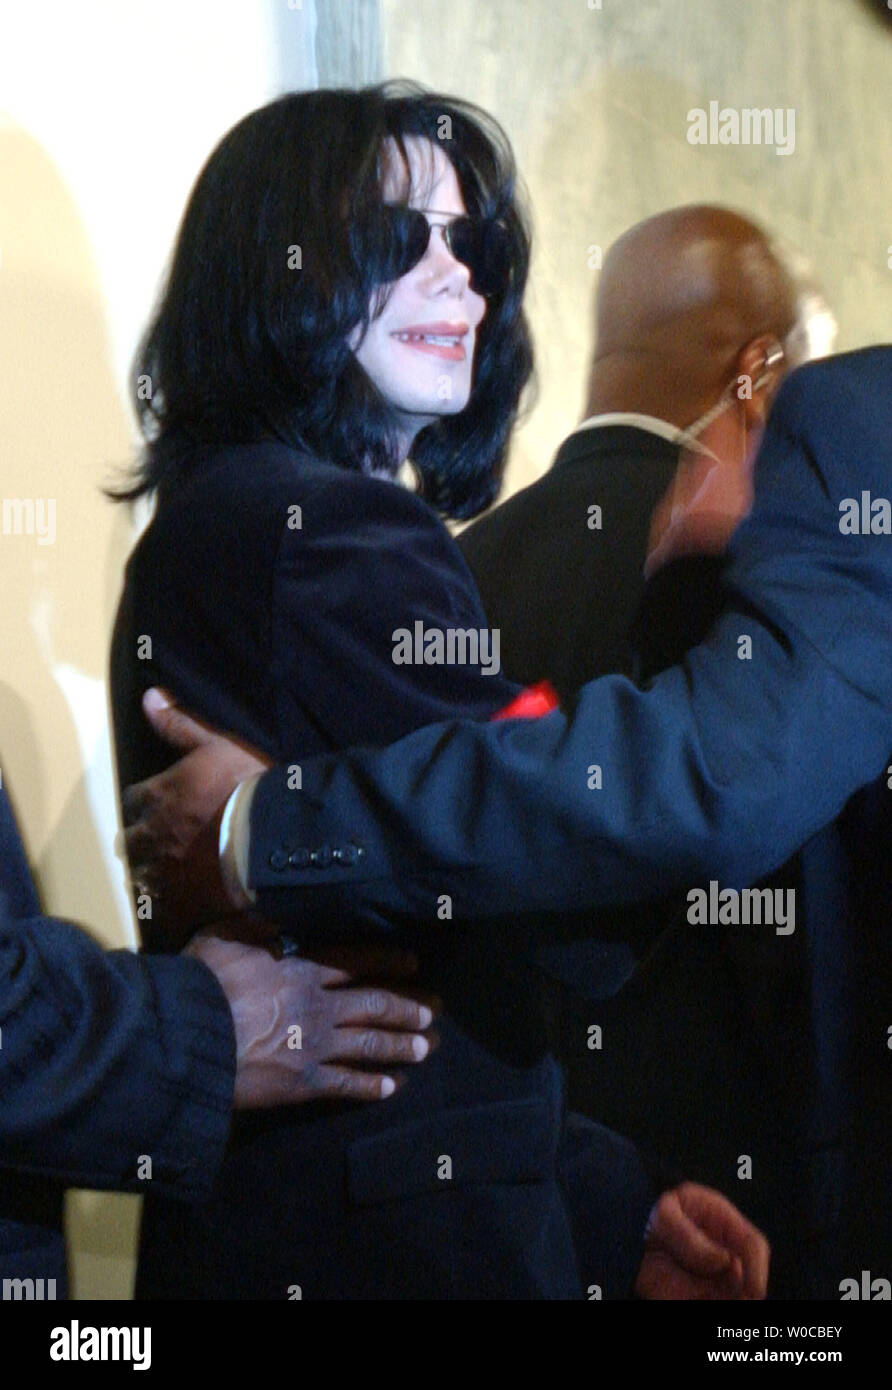 Michael Jackson, surrounded by security, exits from a meeting with black Congressional members on Capitol Hill in Washington on March 30, 2004. Jackson did not speak to the press, but in a statement he asked Congress to keep working on improving AIDS treament, healthcare, education and unemployment, especially in what he called 'our sister continent,' Africa.    (UPI Photo/Roger L. Wollenberg) Stock Photo